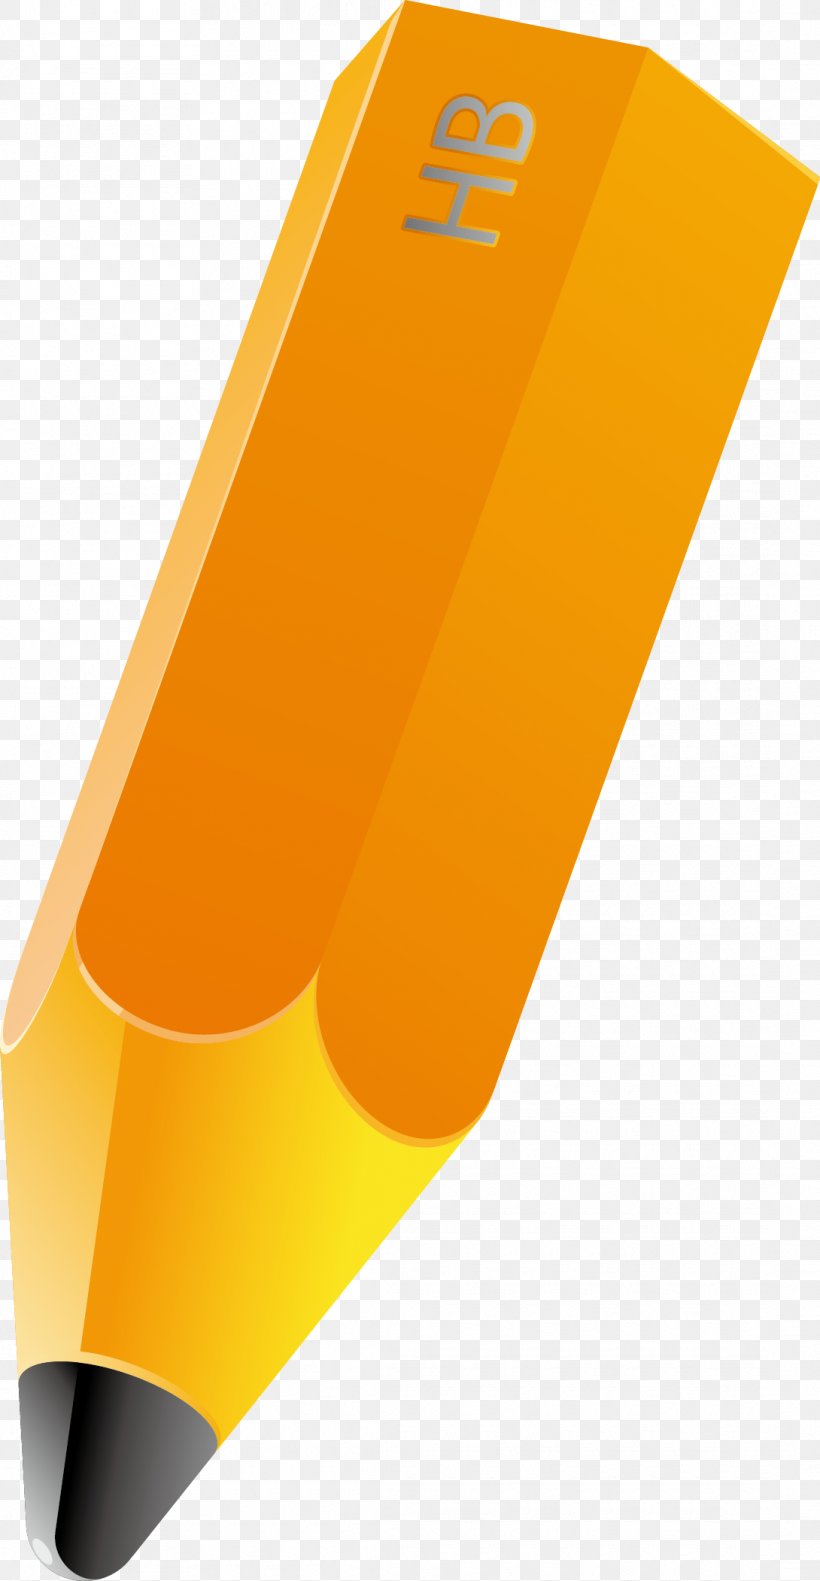 Pencil, PNG, 1090x2102px, Pencil, Orange, Painting, Yellow Download Free